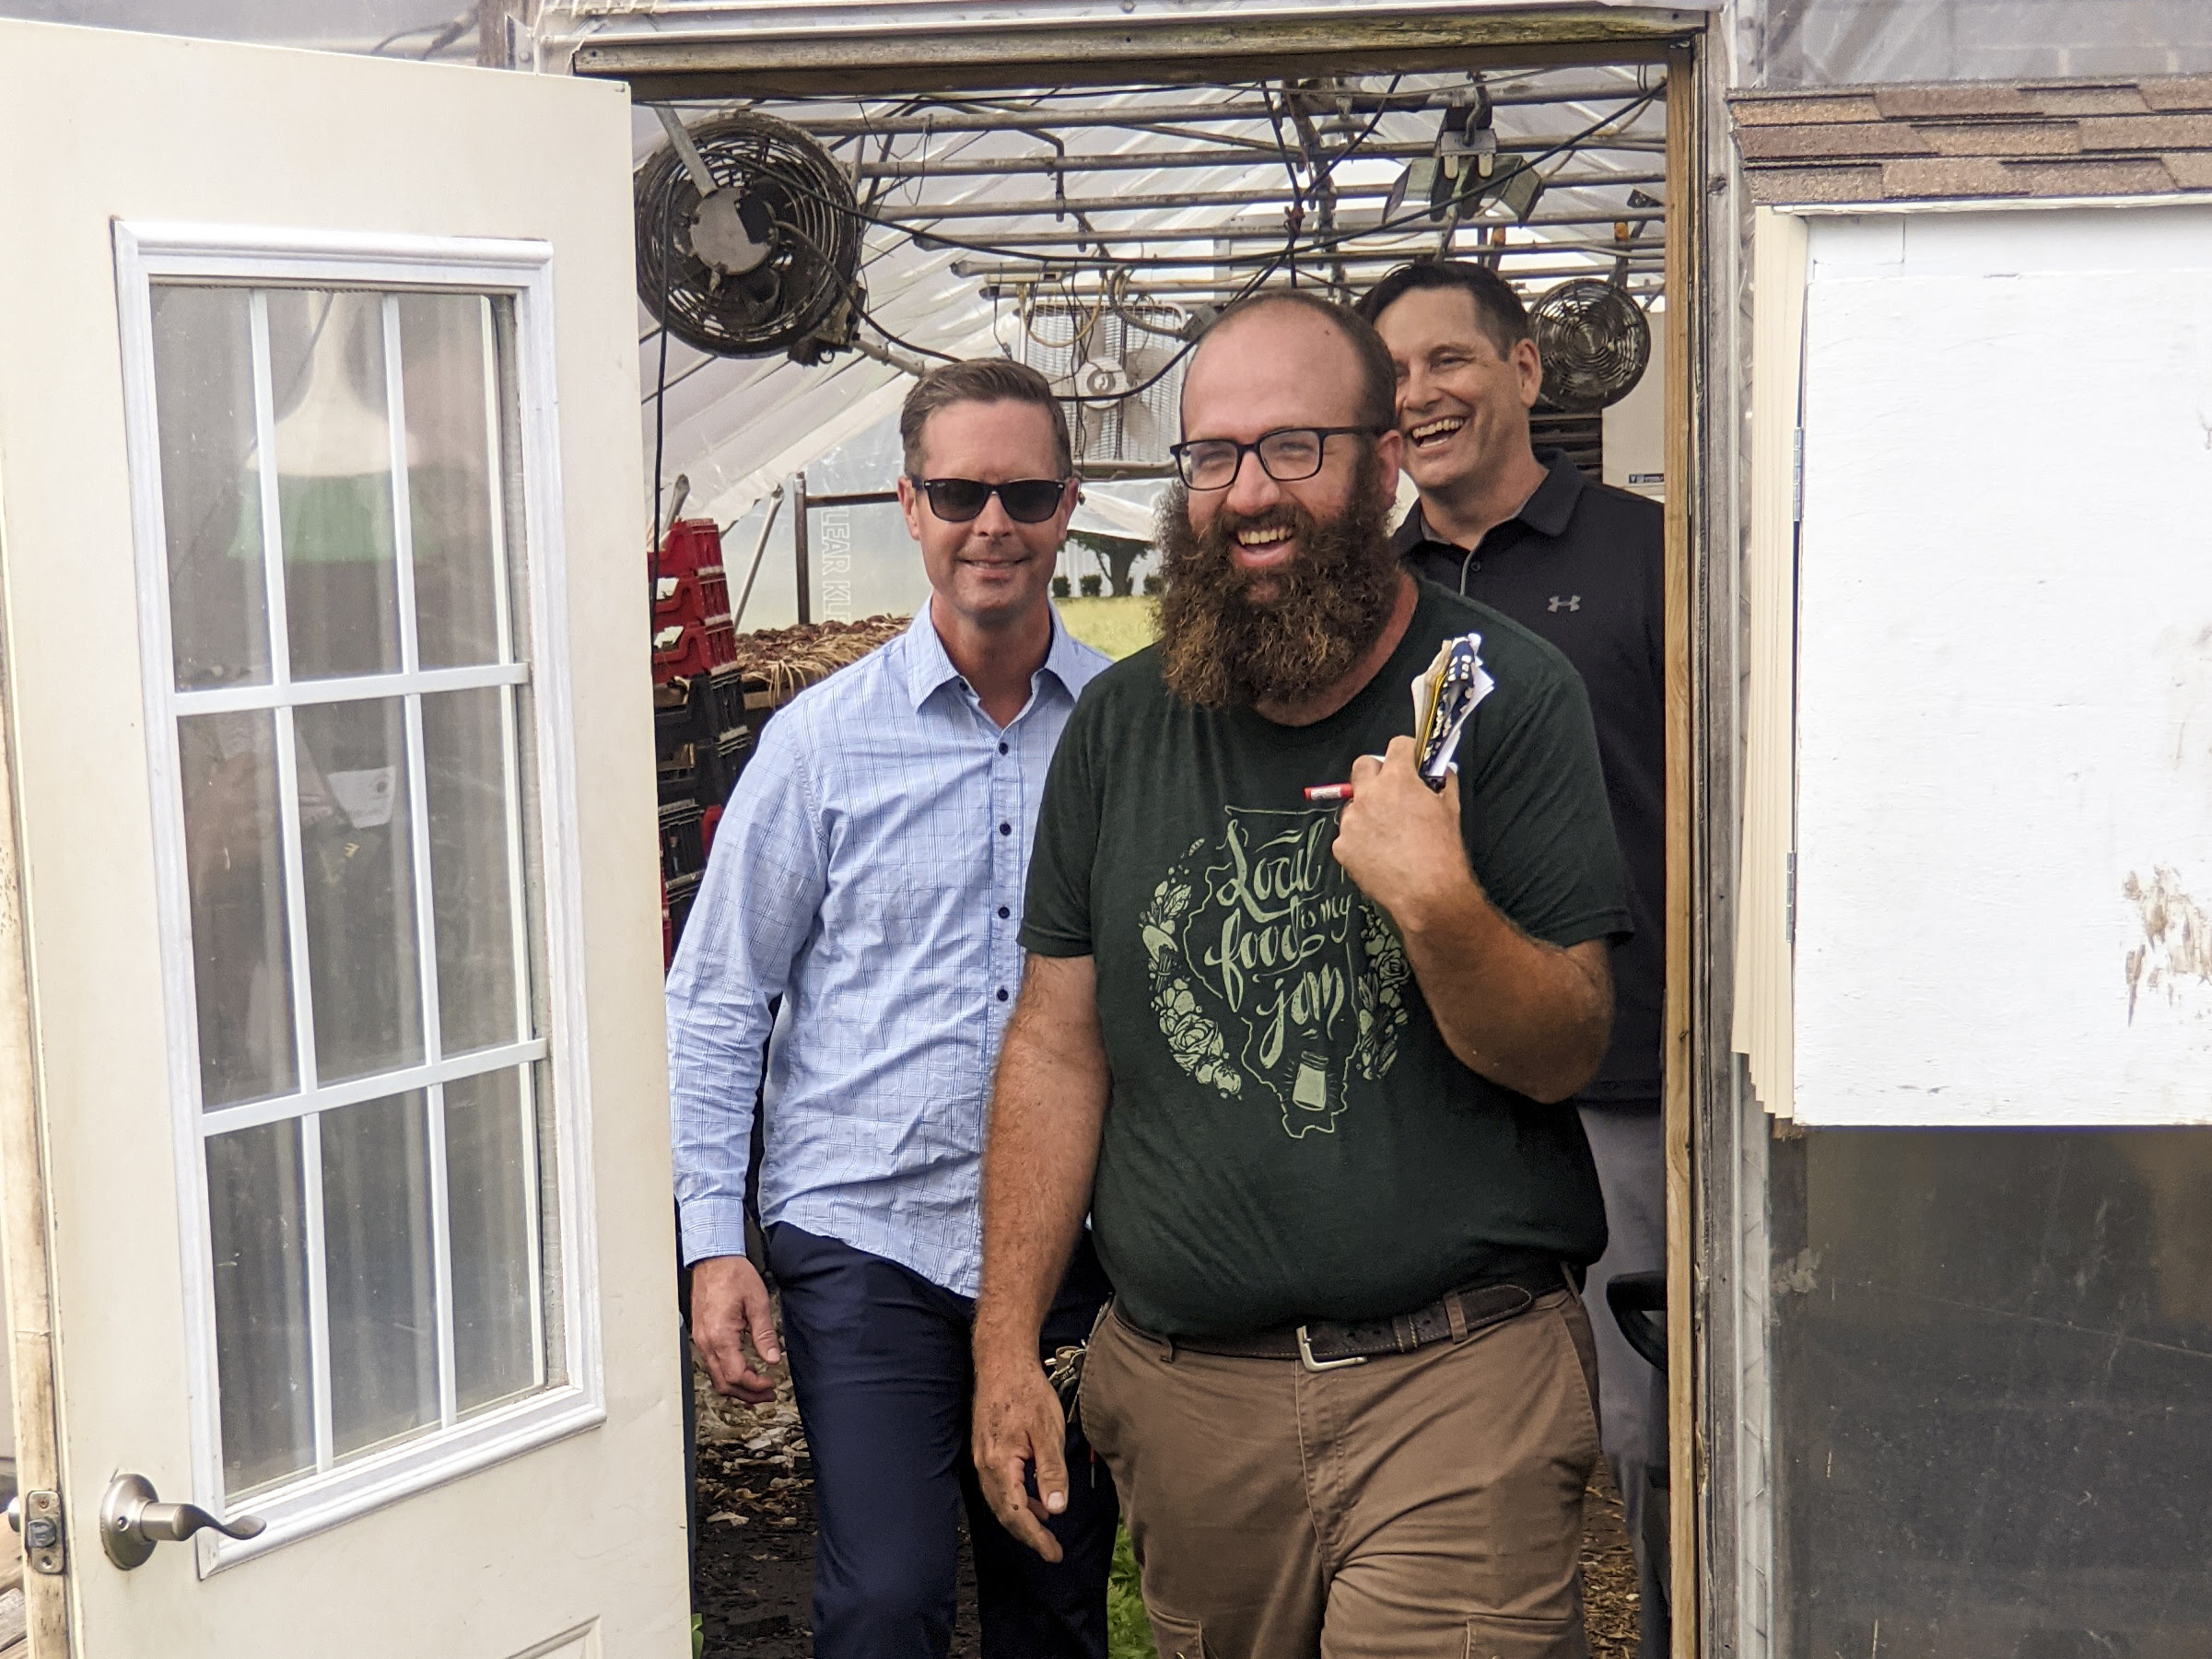 Congressman Rep. Rodney Davis, State Rep. Tim Butler and John Williams, farm manager of Sola Gratia exit a green house smiling and laughing.